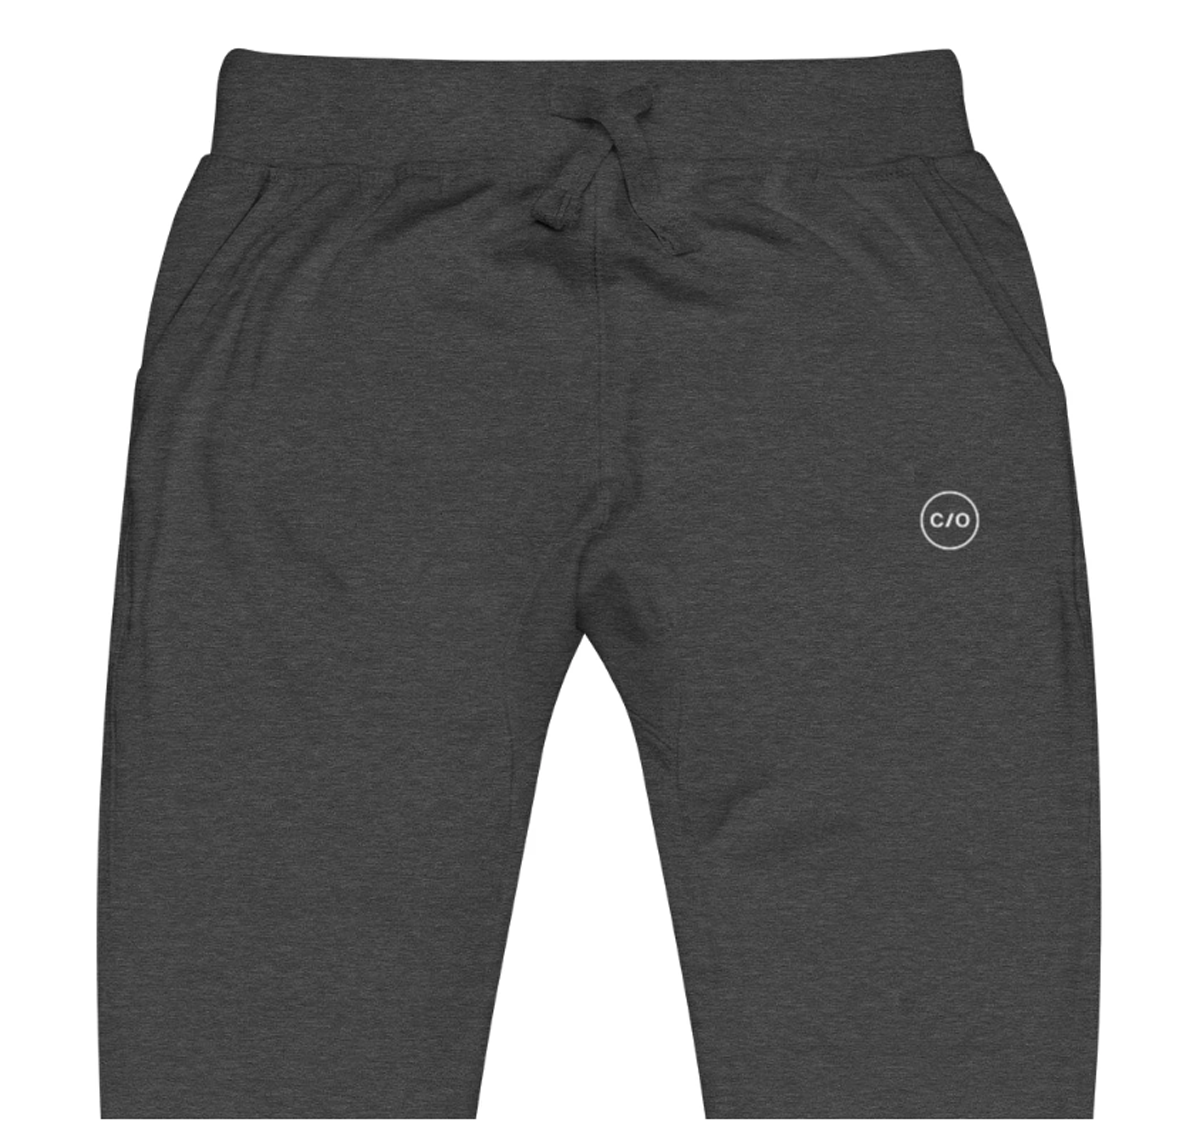 Neue Supply Co. Women's Performance Jogger in Charcoal Heather